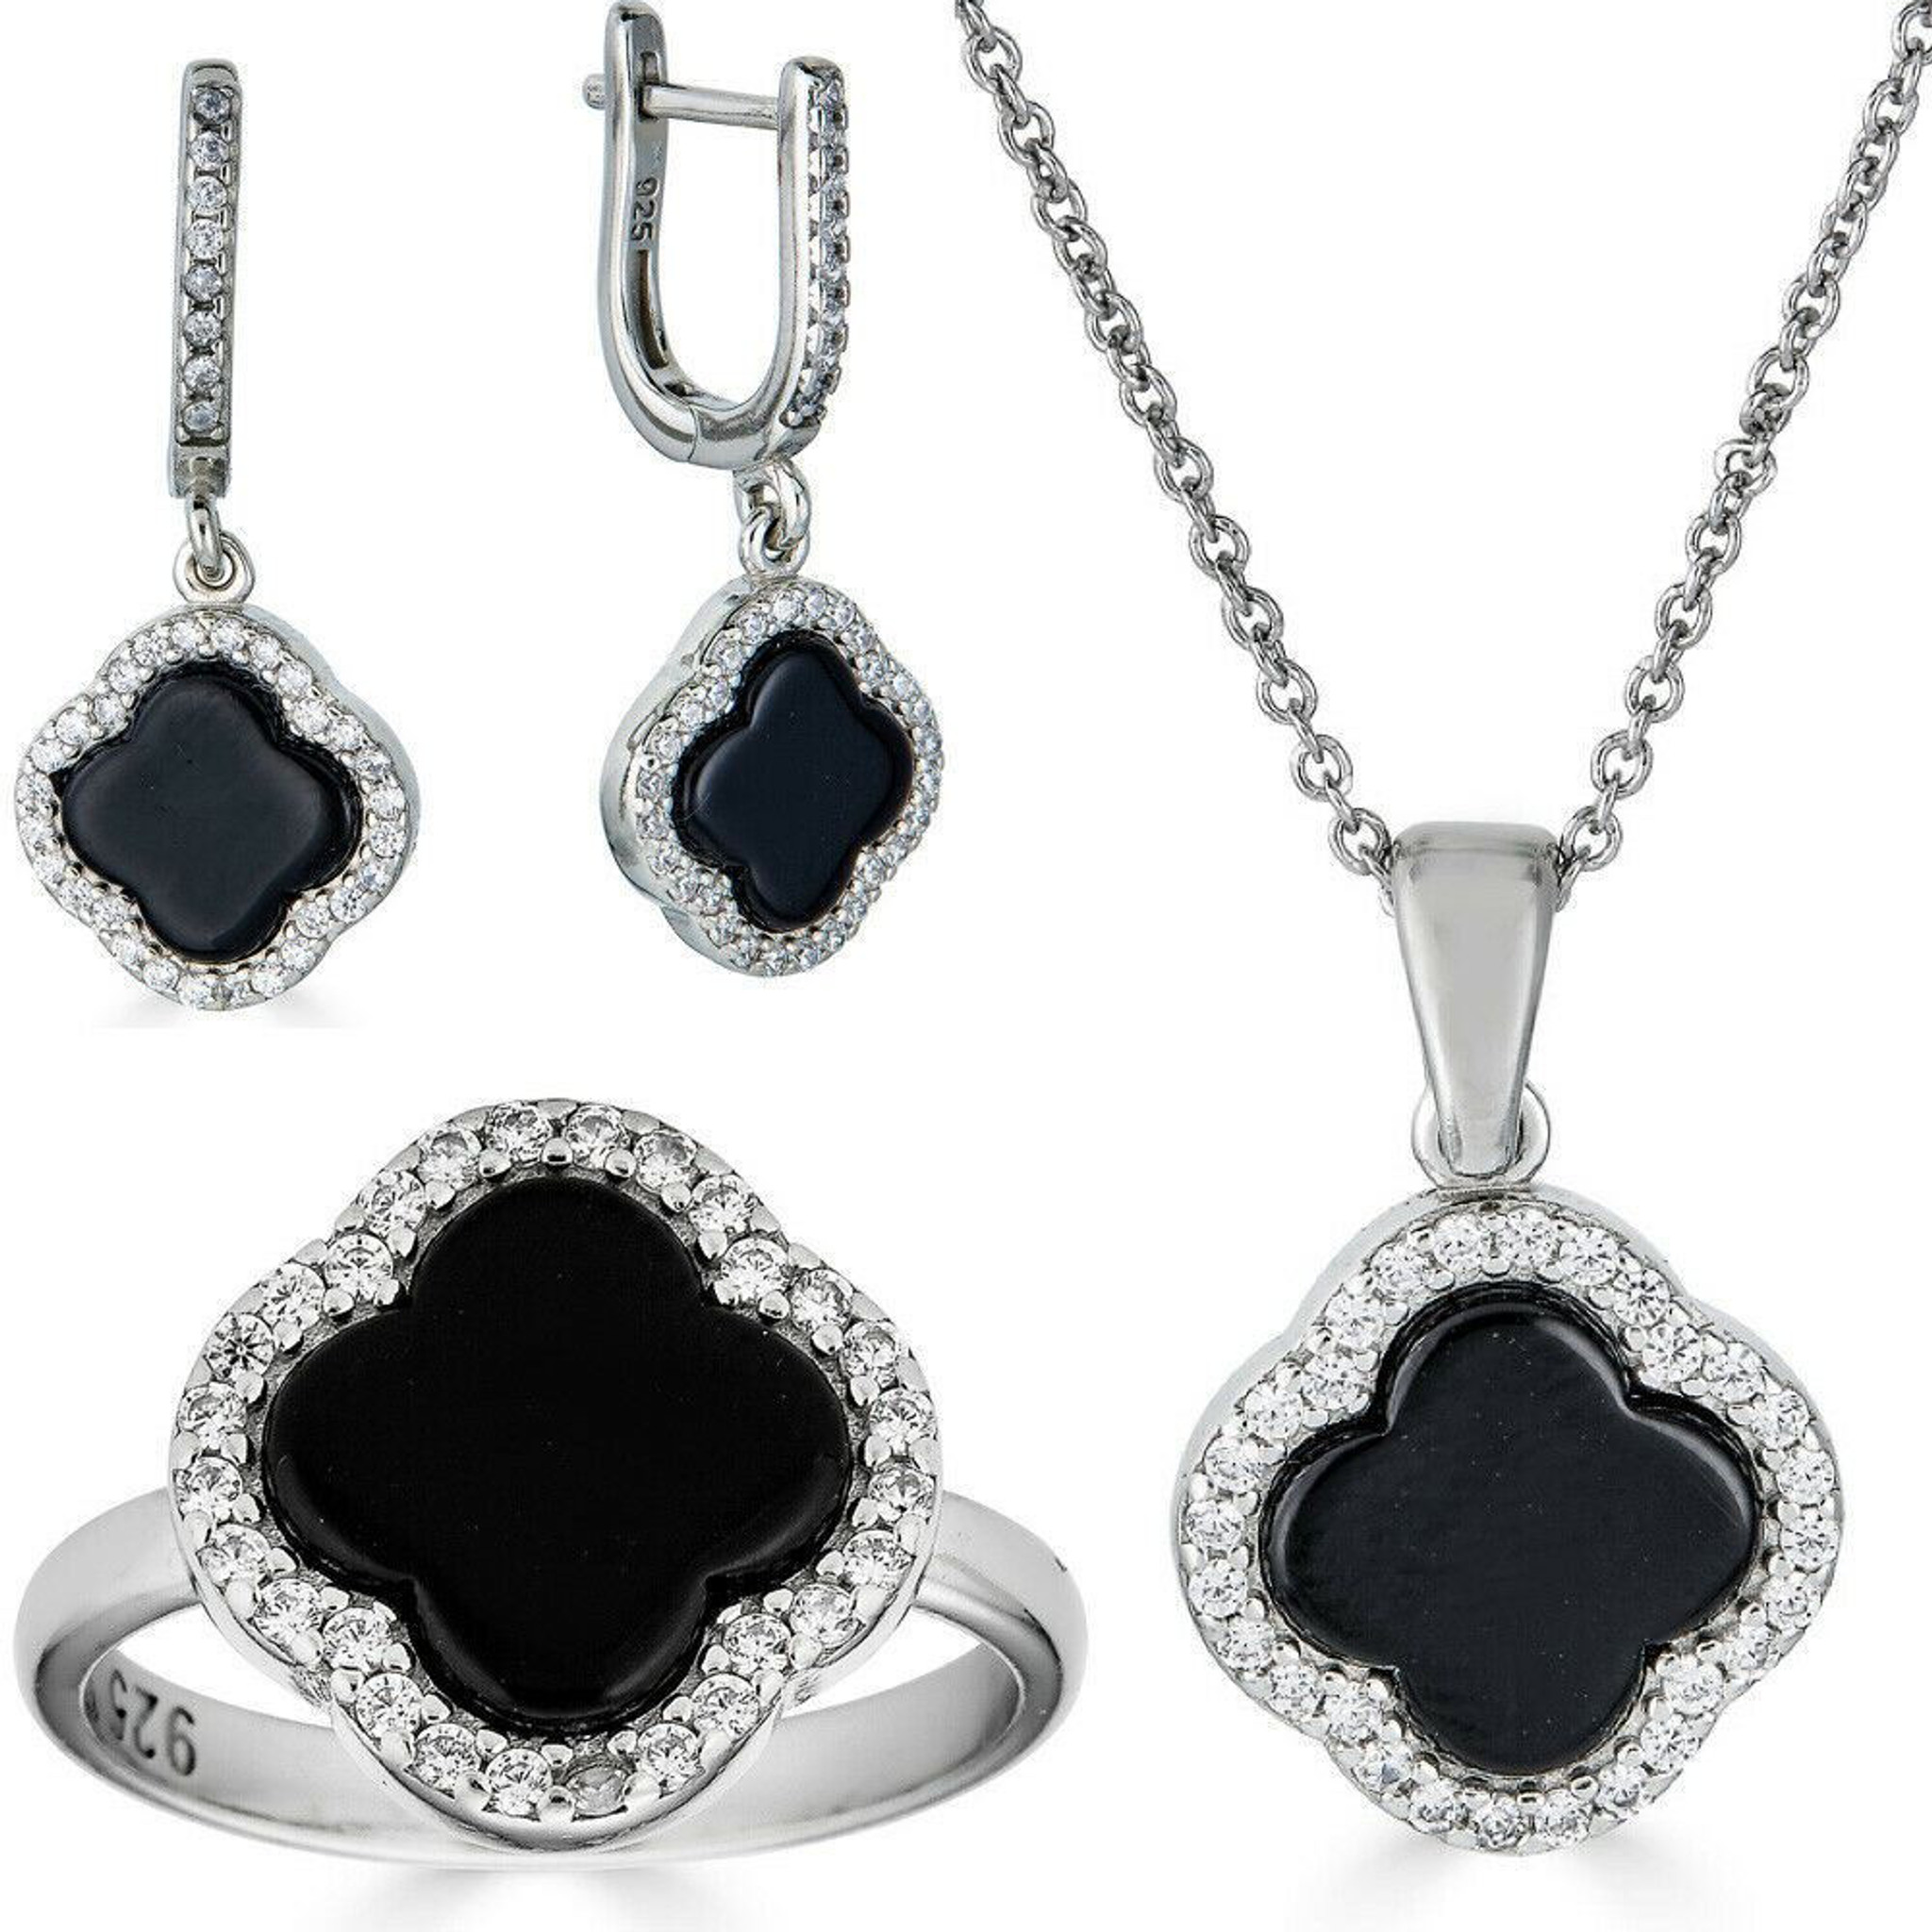 Black Jewelry Set With Full Zircons, Including Necklace And Earrings |  SHEIN USA